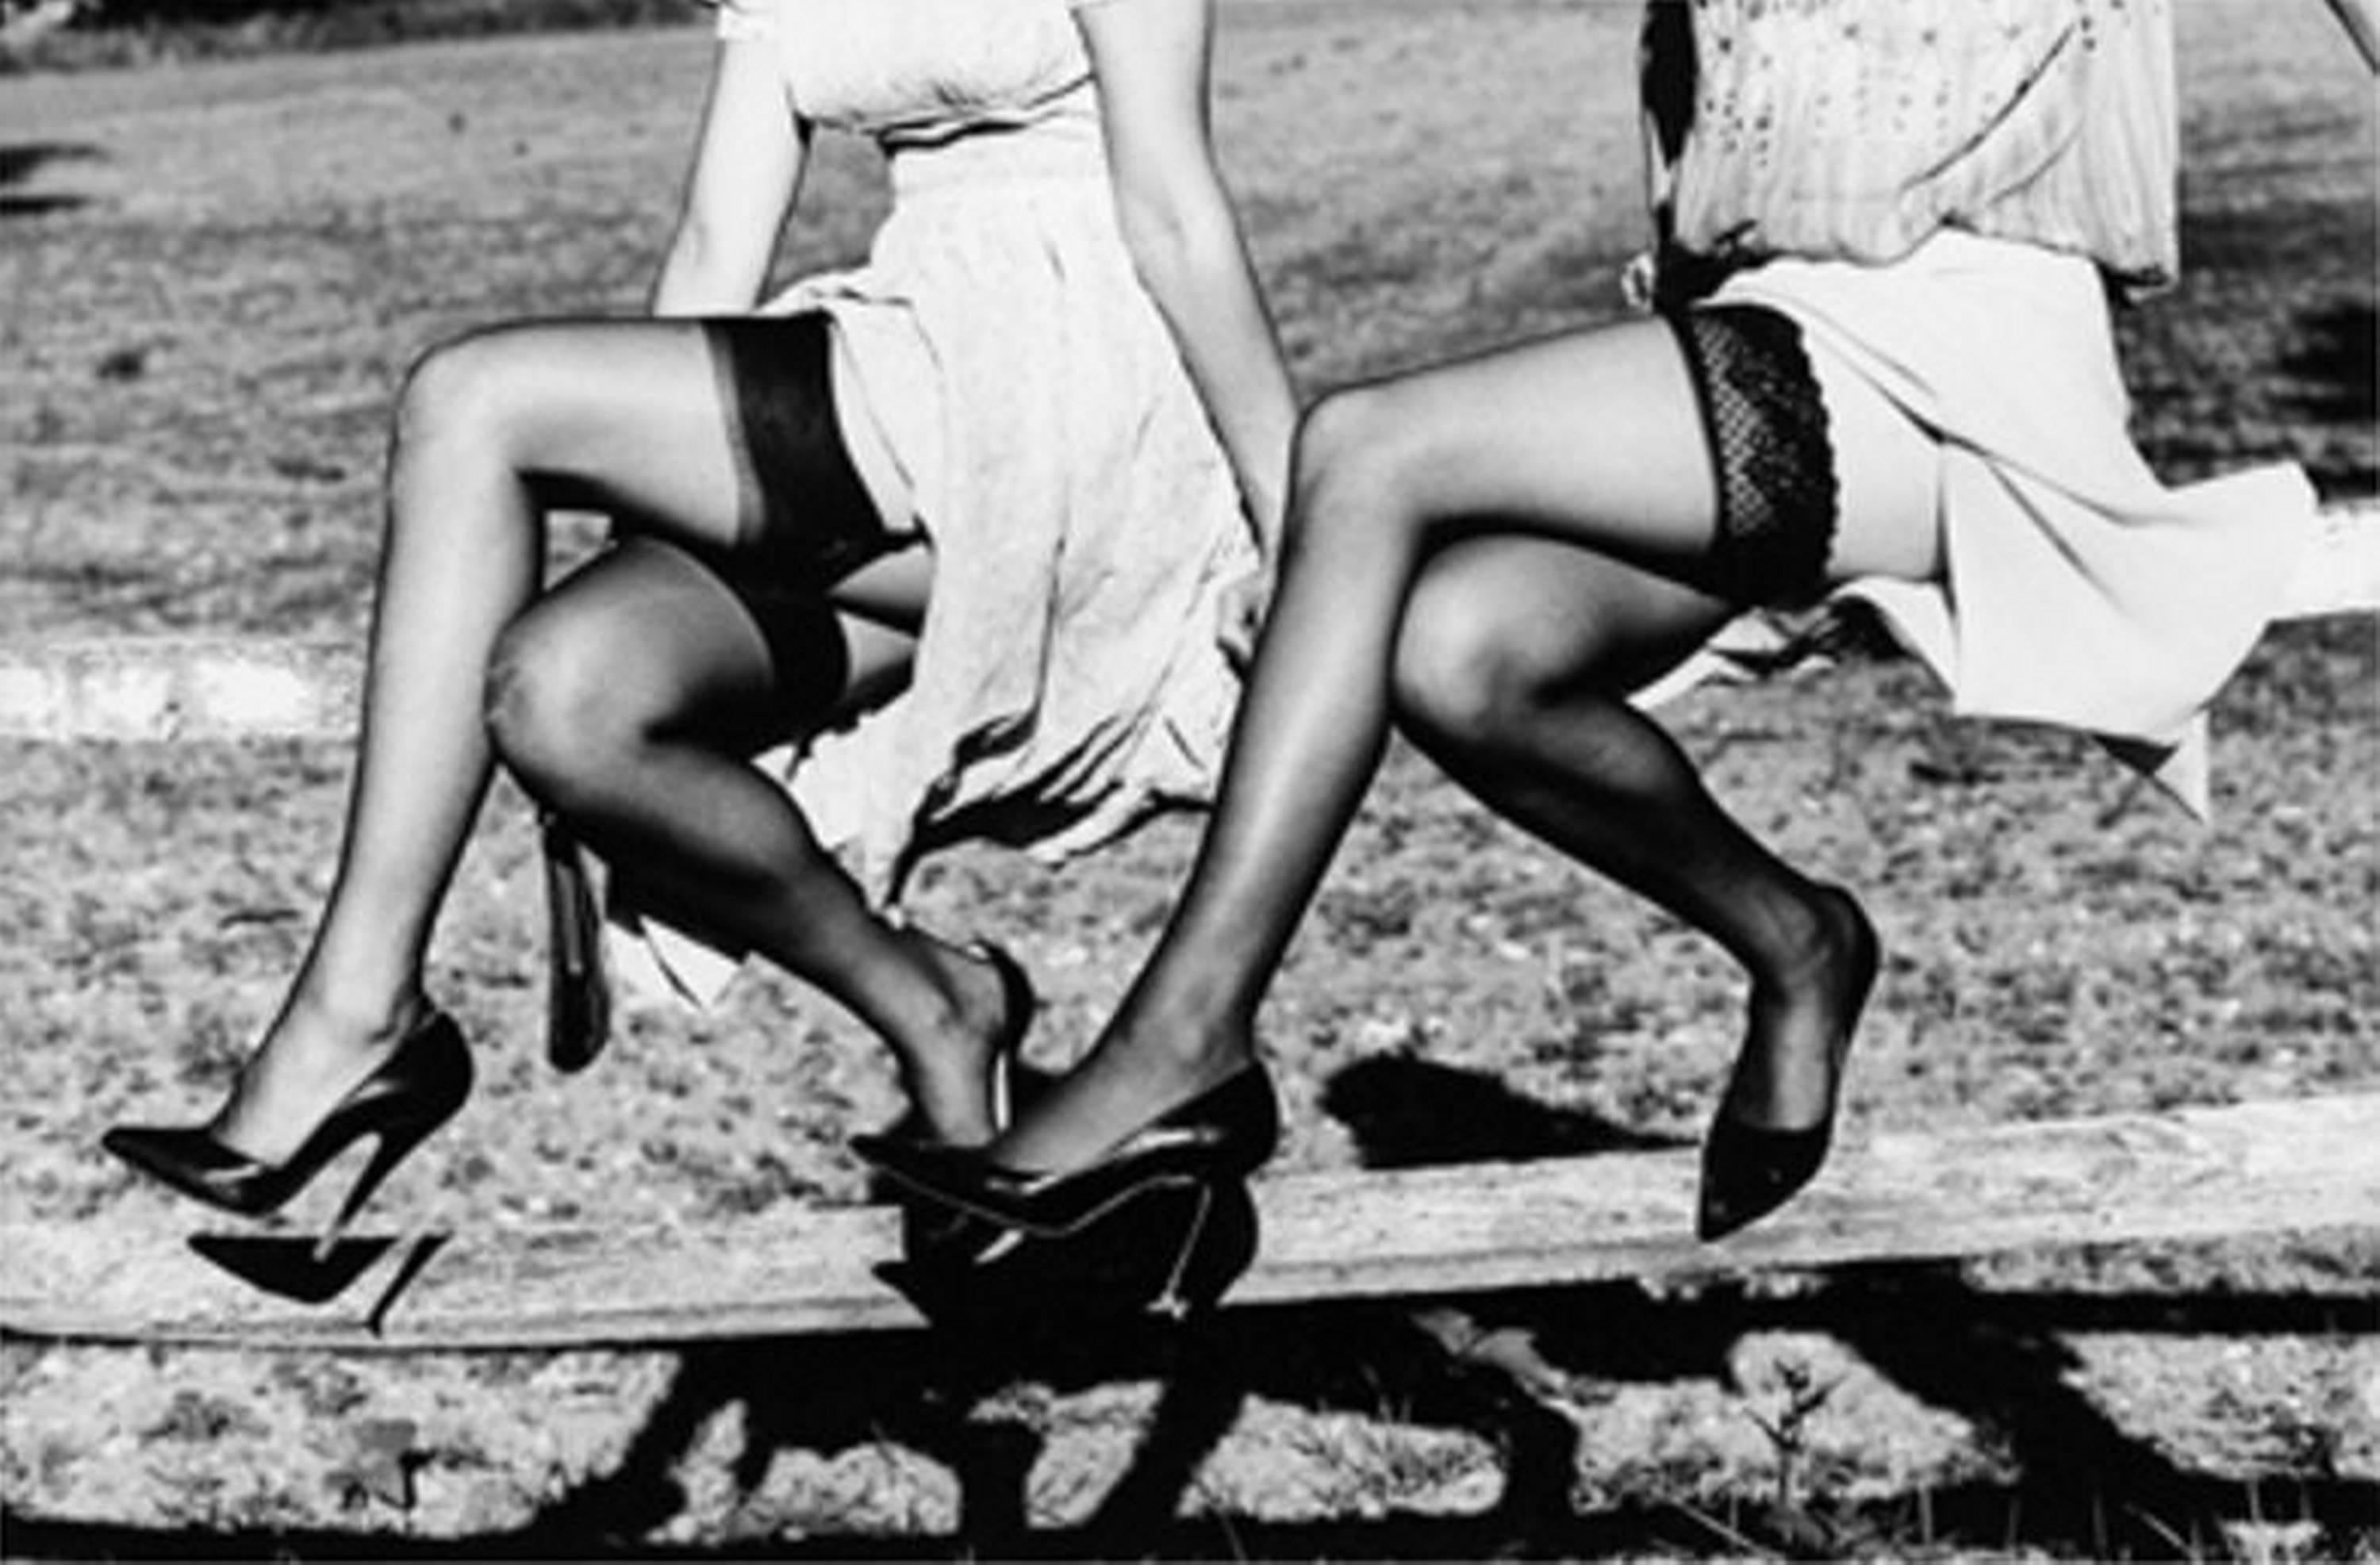 Leg Show II - Models in Stockings sitting on a fence, fine art photography, 2002